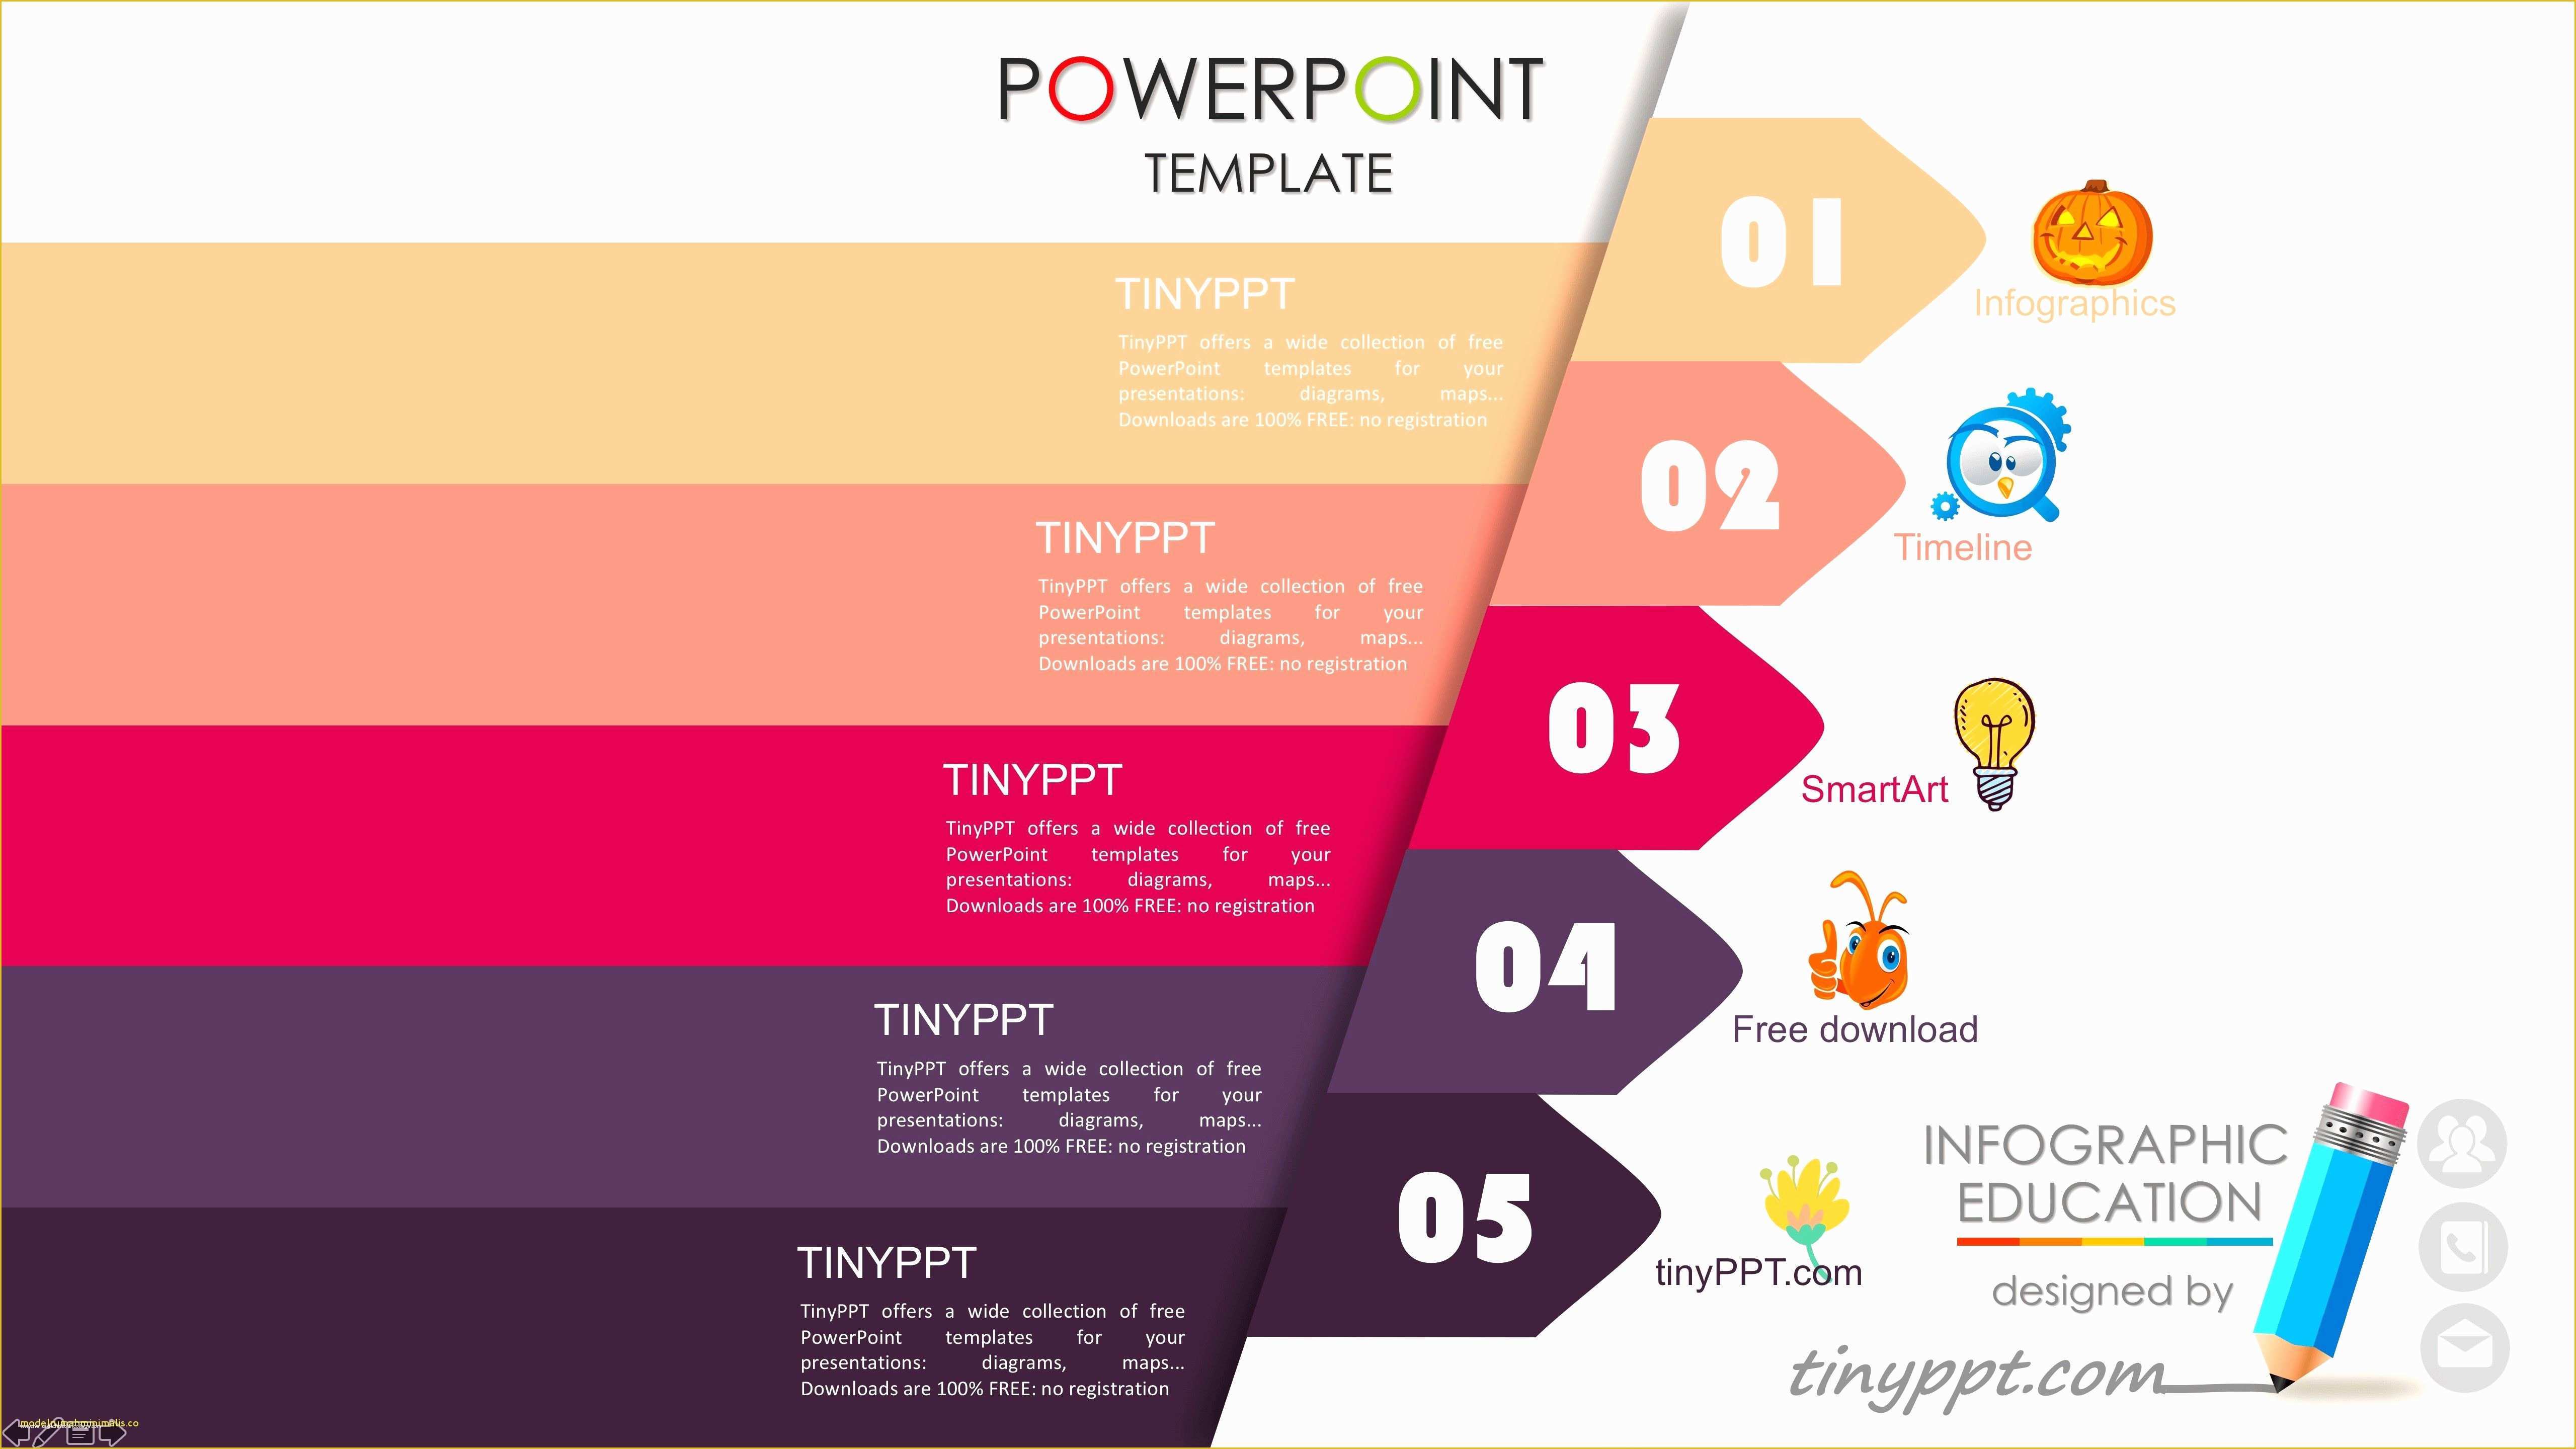 Awesome Powerpoint Templates Free Of Lovely Awesome Powerpoint Templates